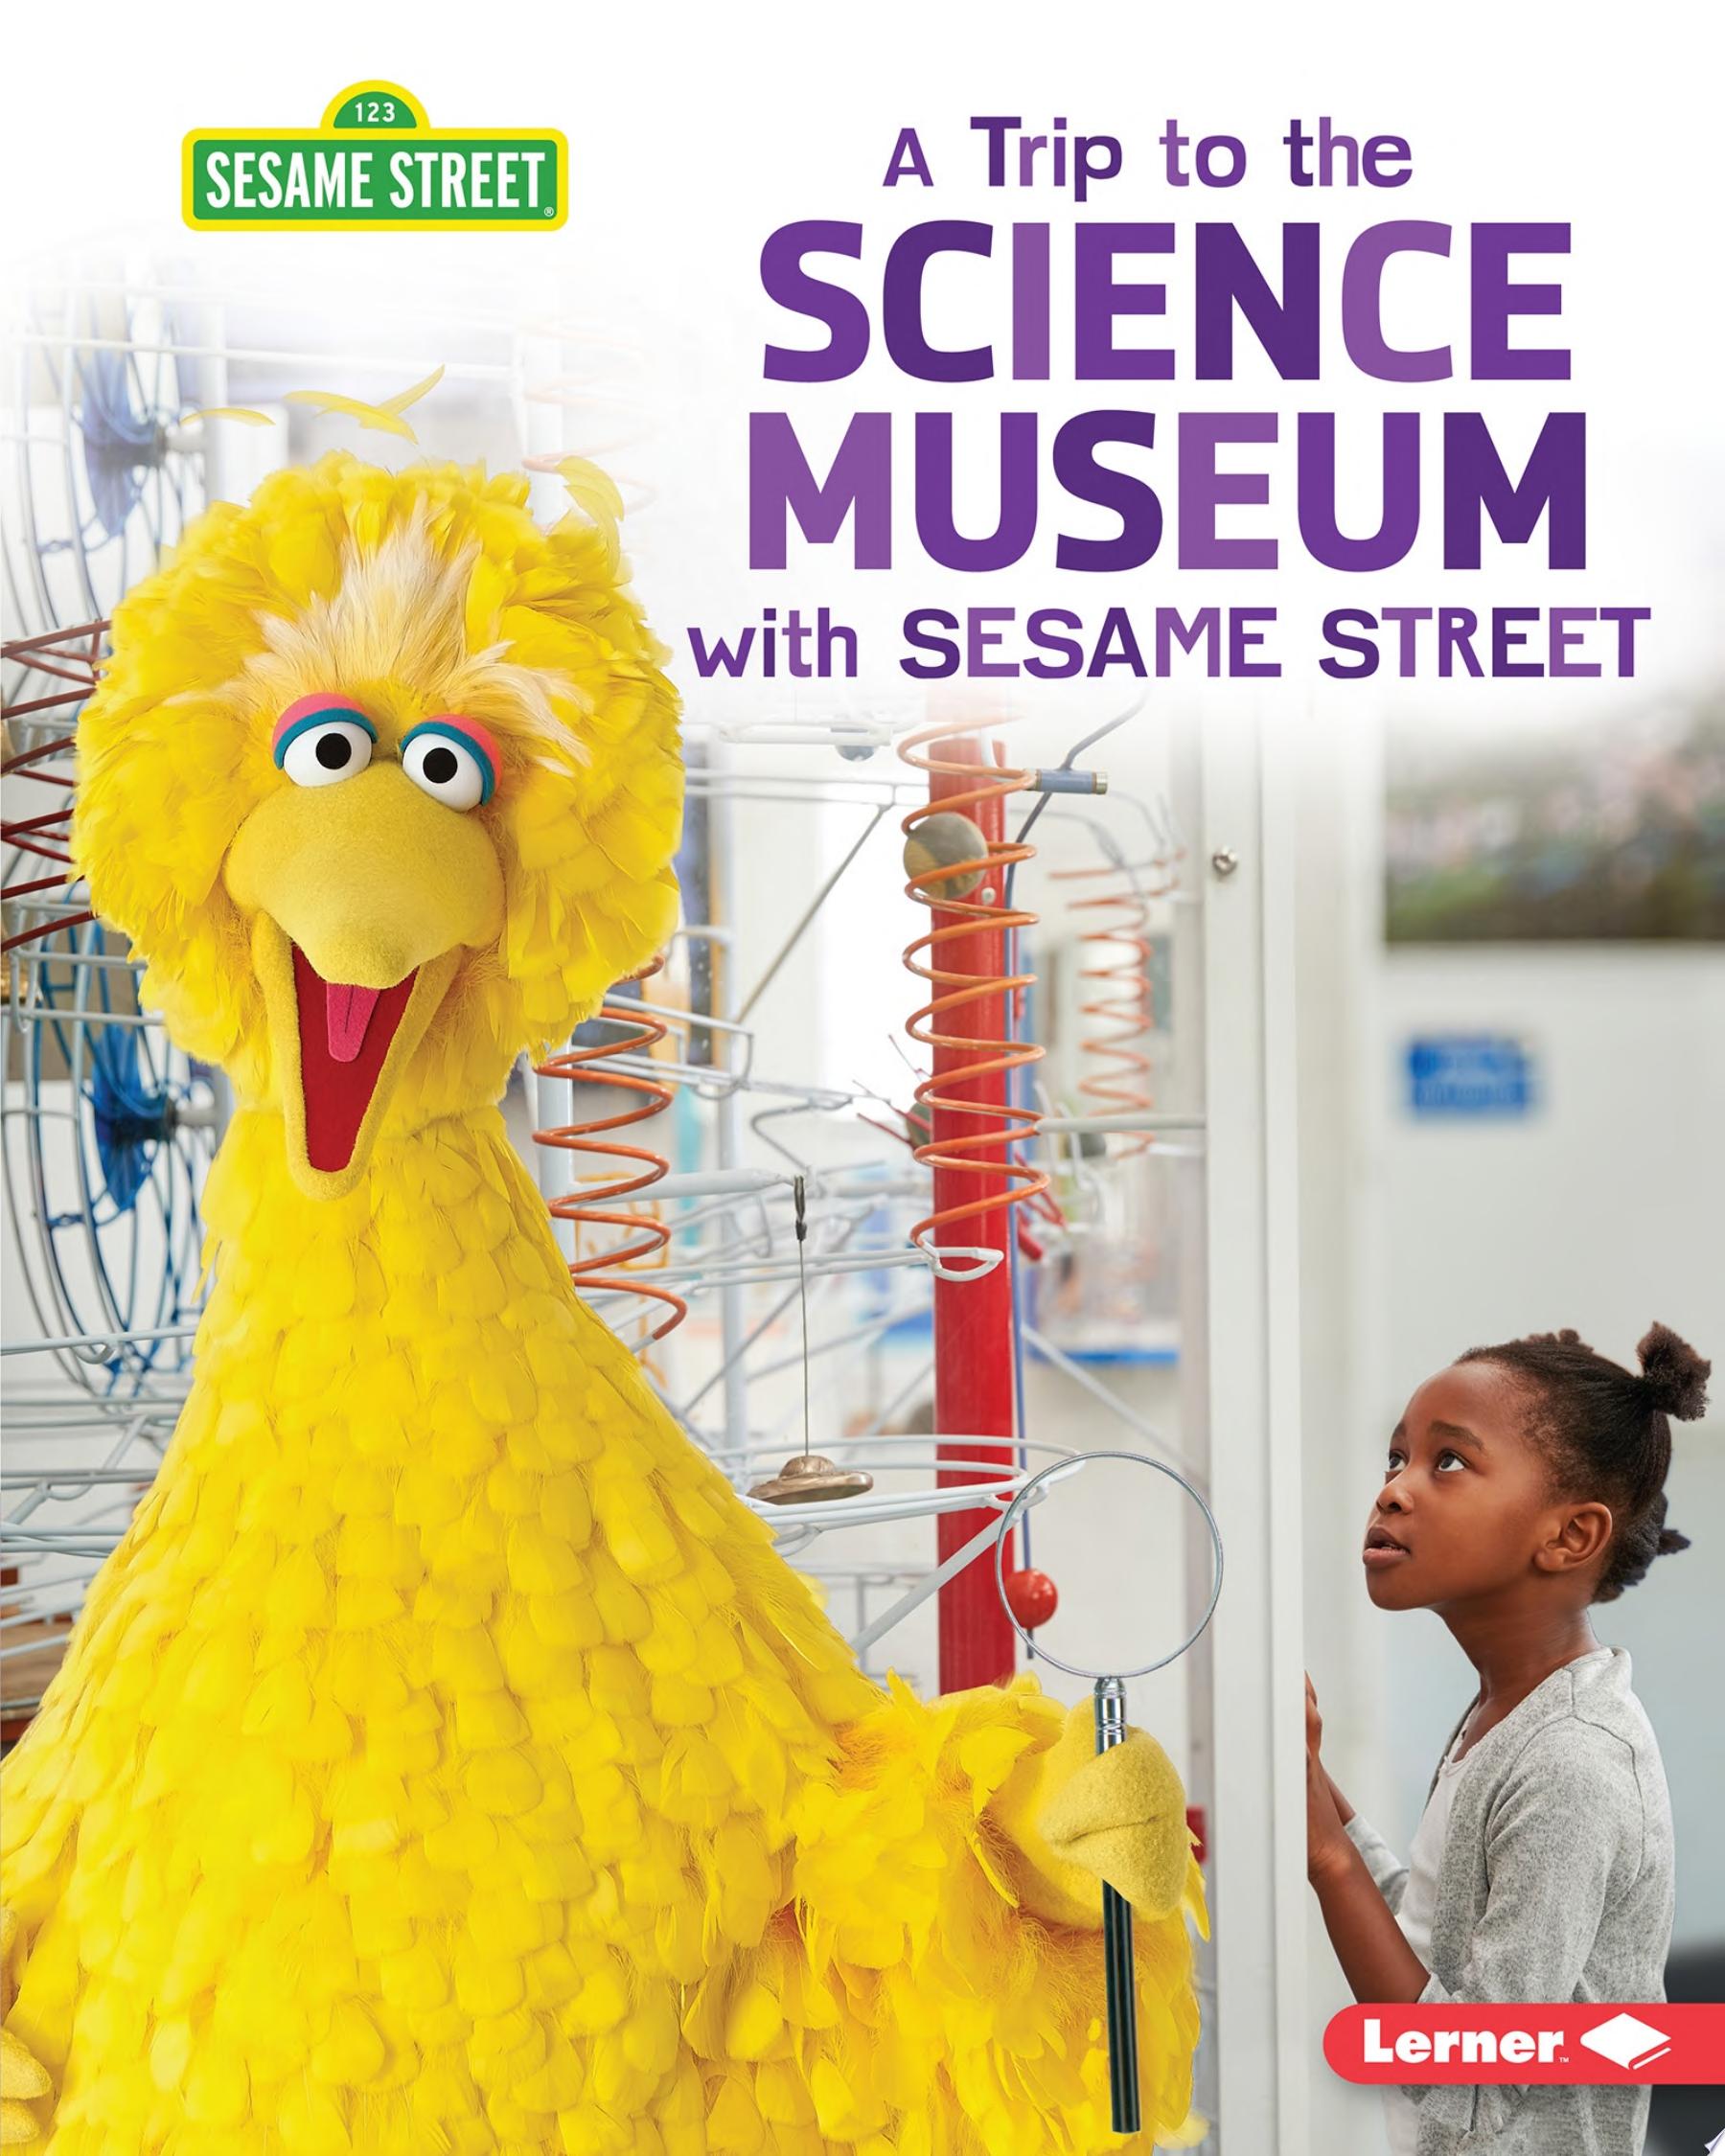 Image for "A Trip to the Science Museum with Sesame Street ®"